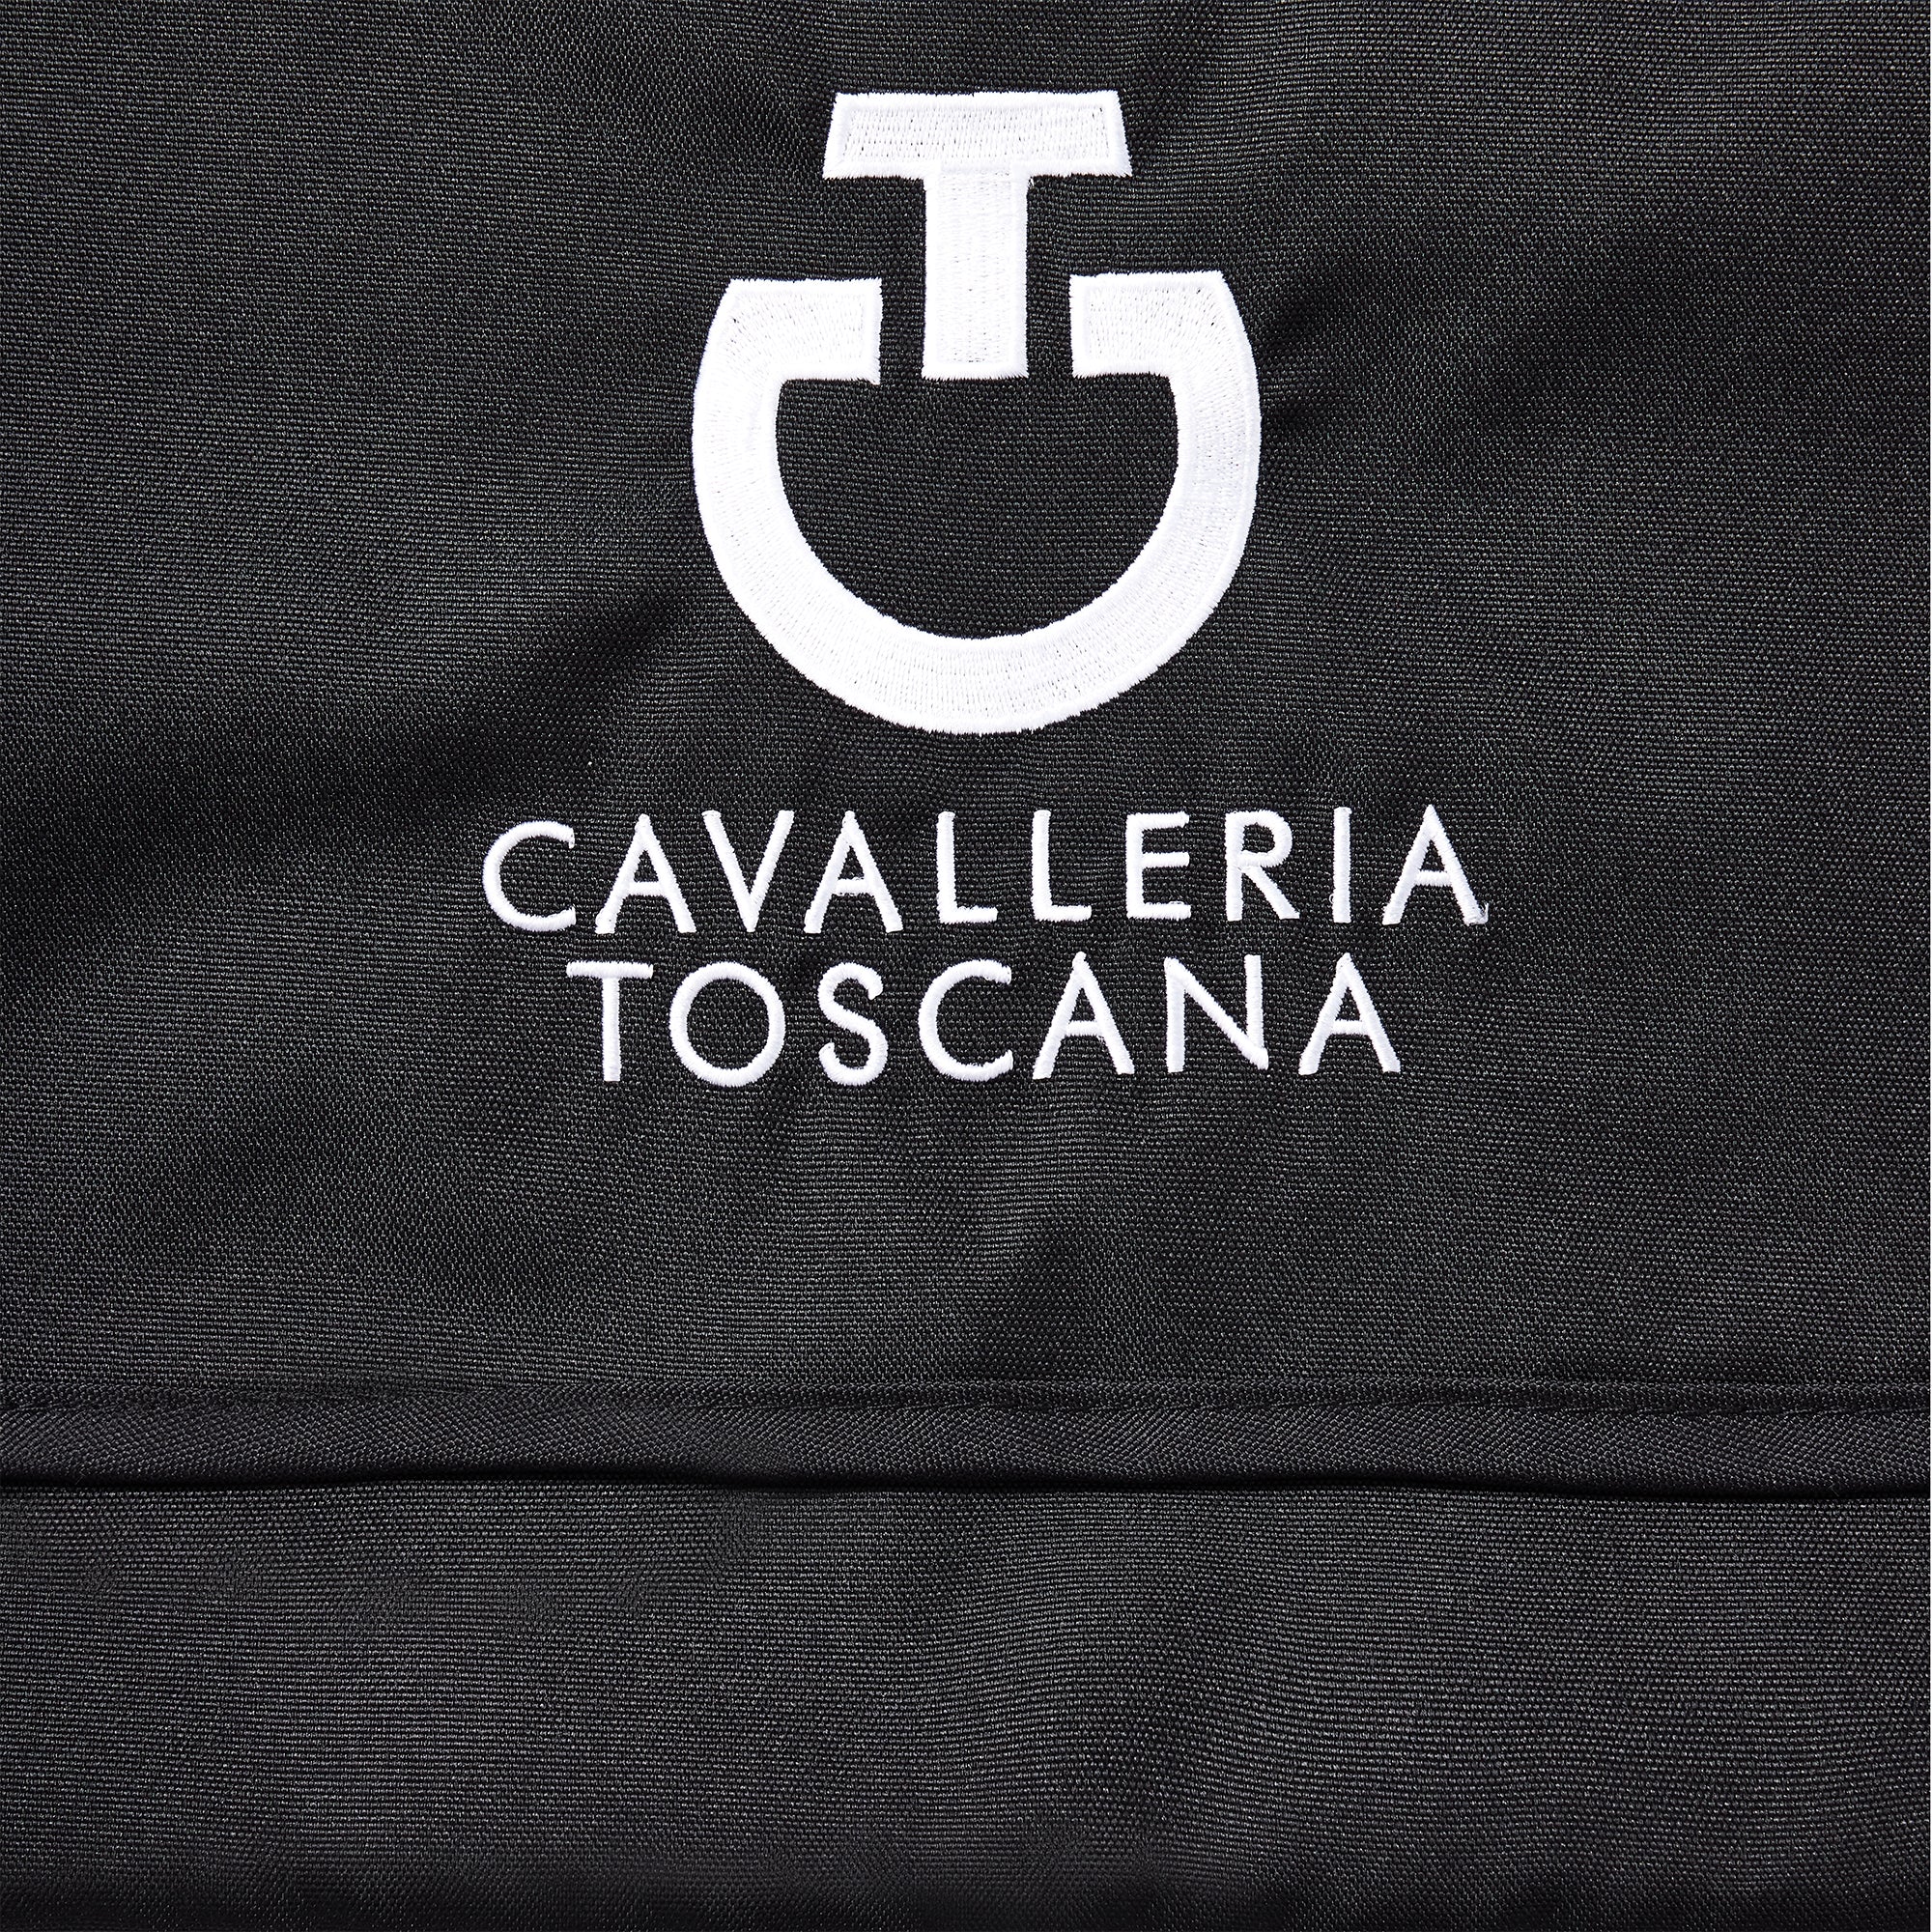 Discover Cavalleria Toscana box curtains - protection for your bandages! Water-repellent material & practical bandage compartment. Buy now!